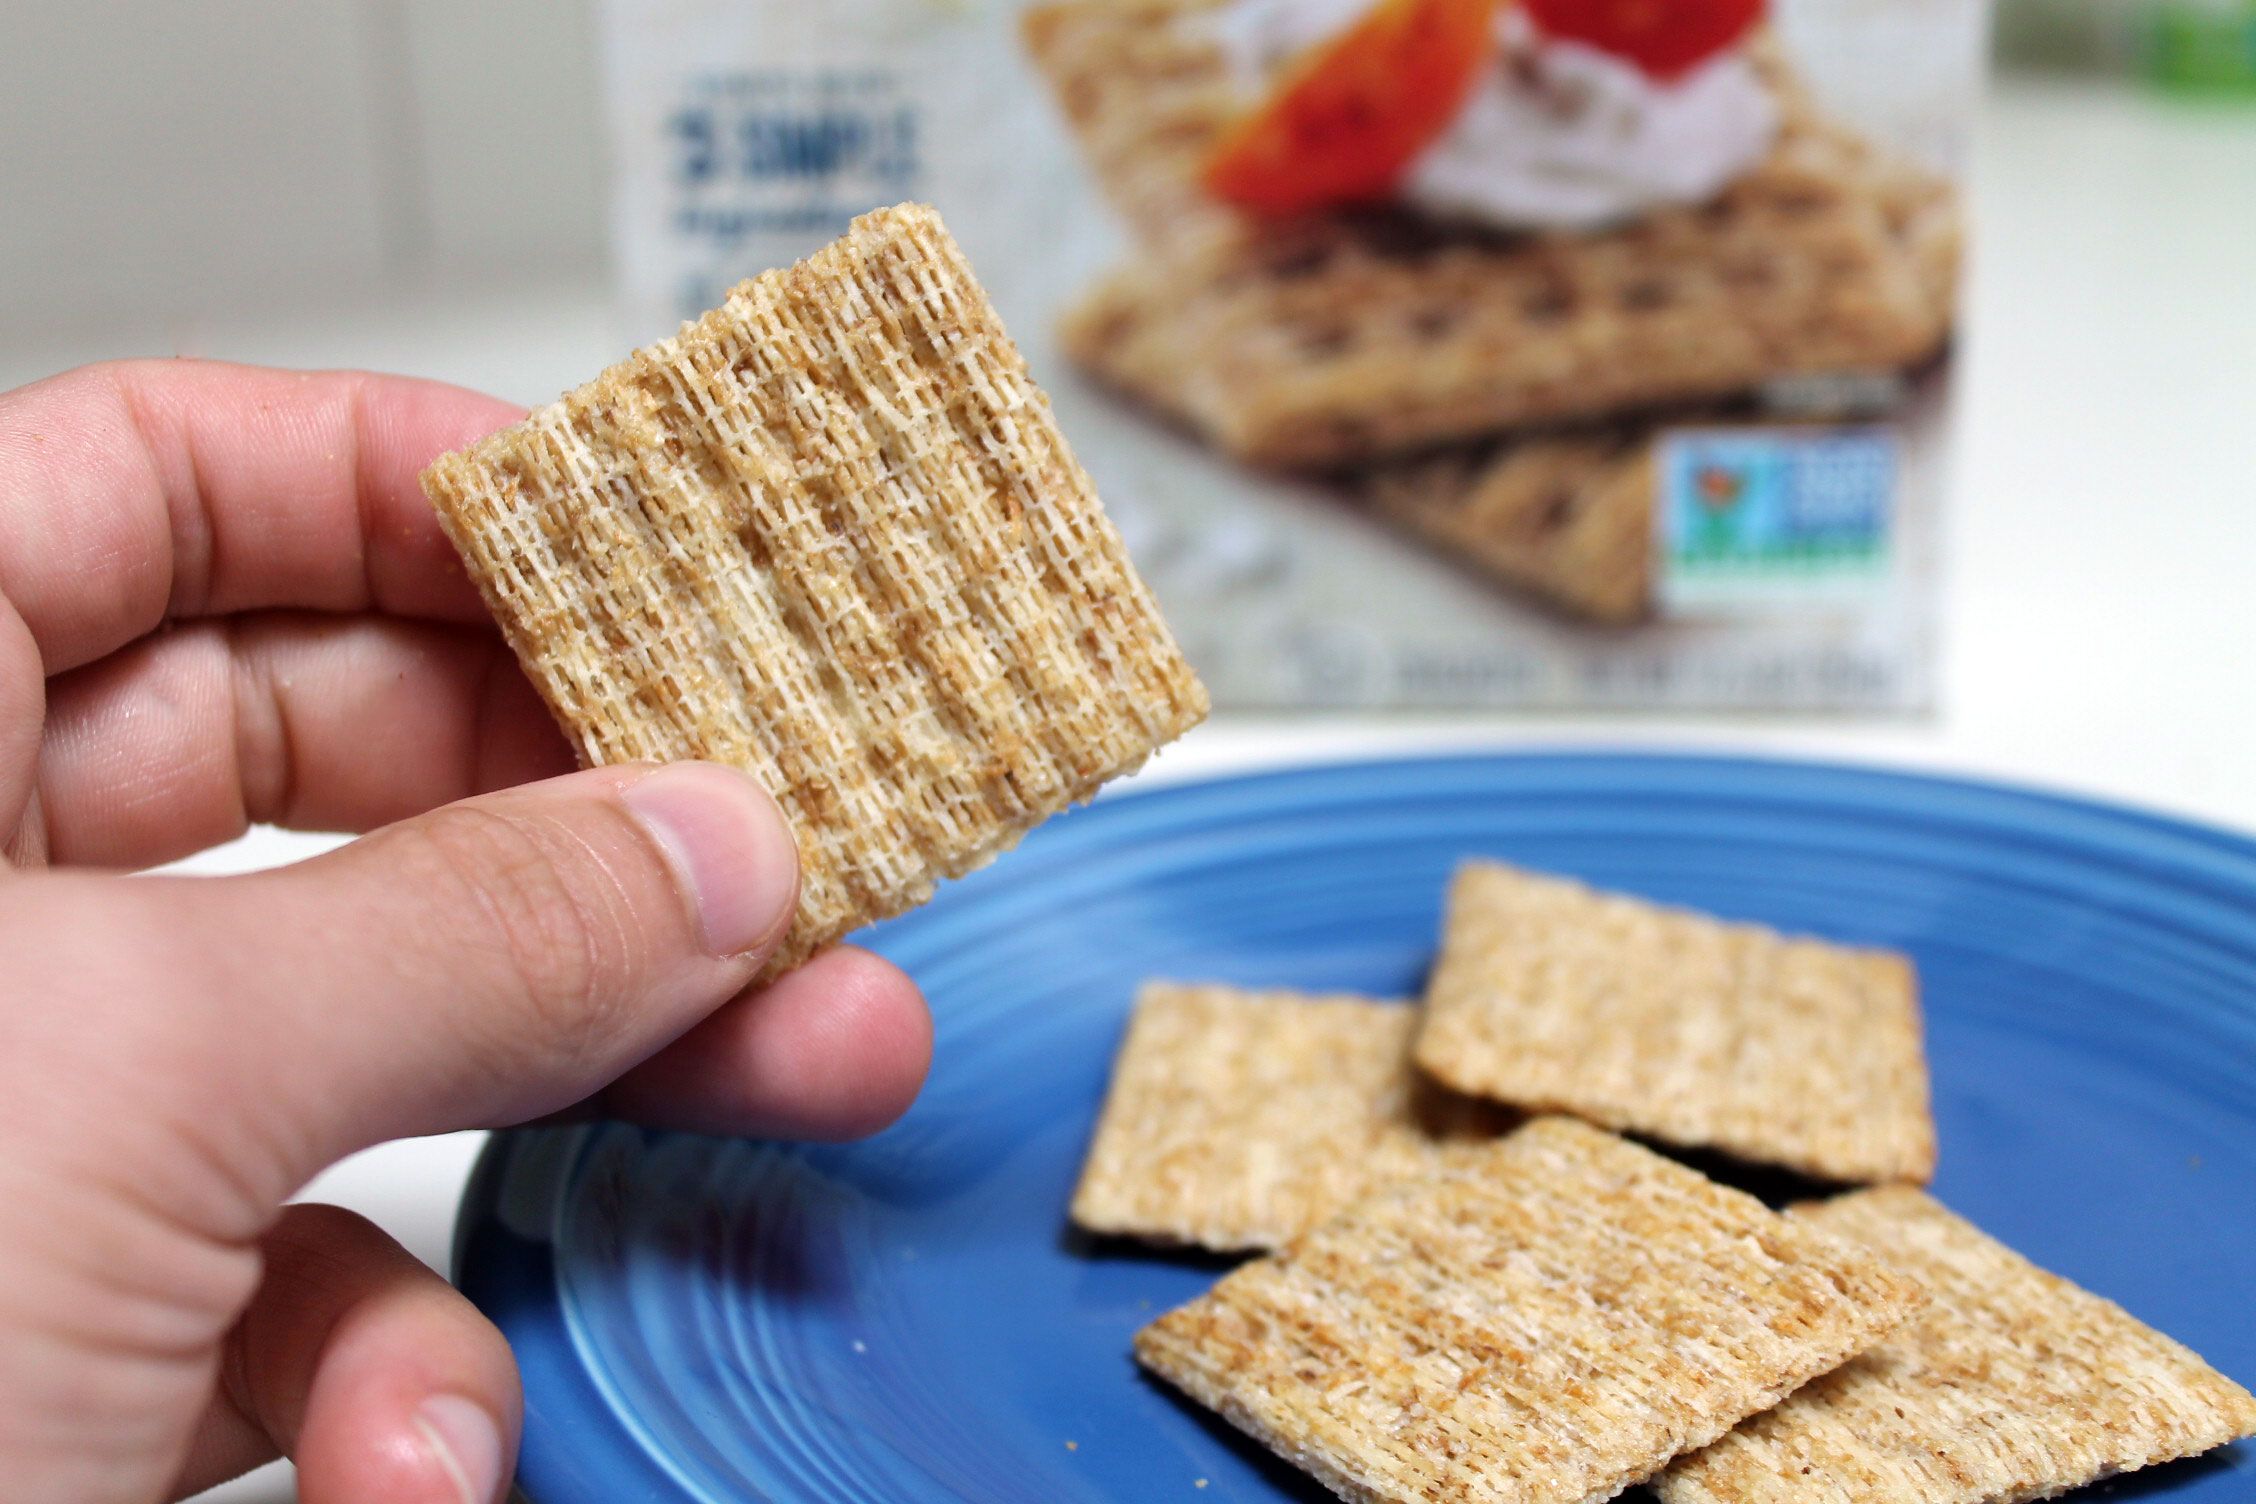 Discovering the Right Way to Eat a Triscuit Has Changed My Life.